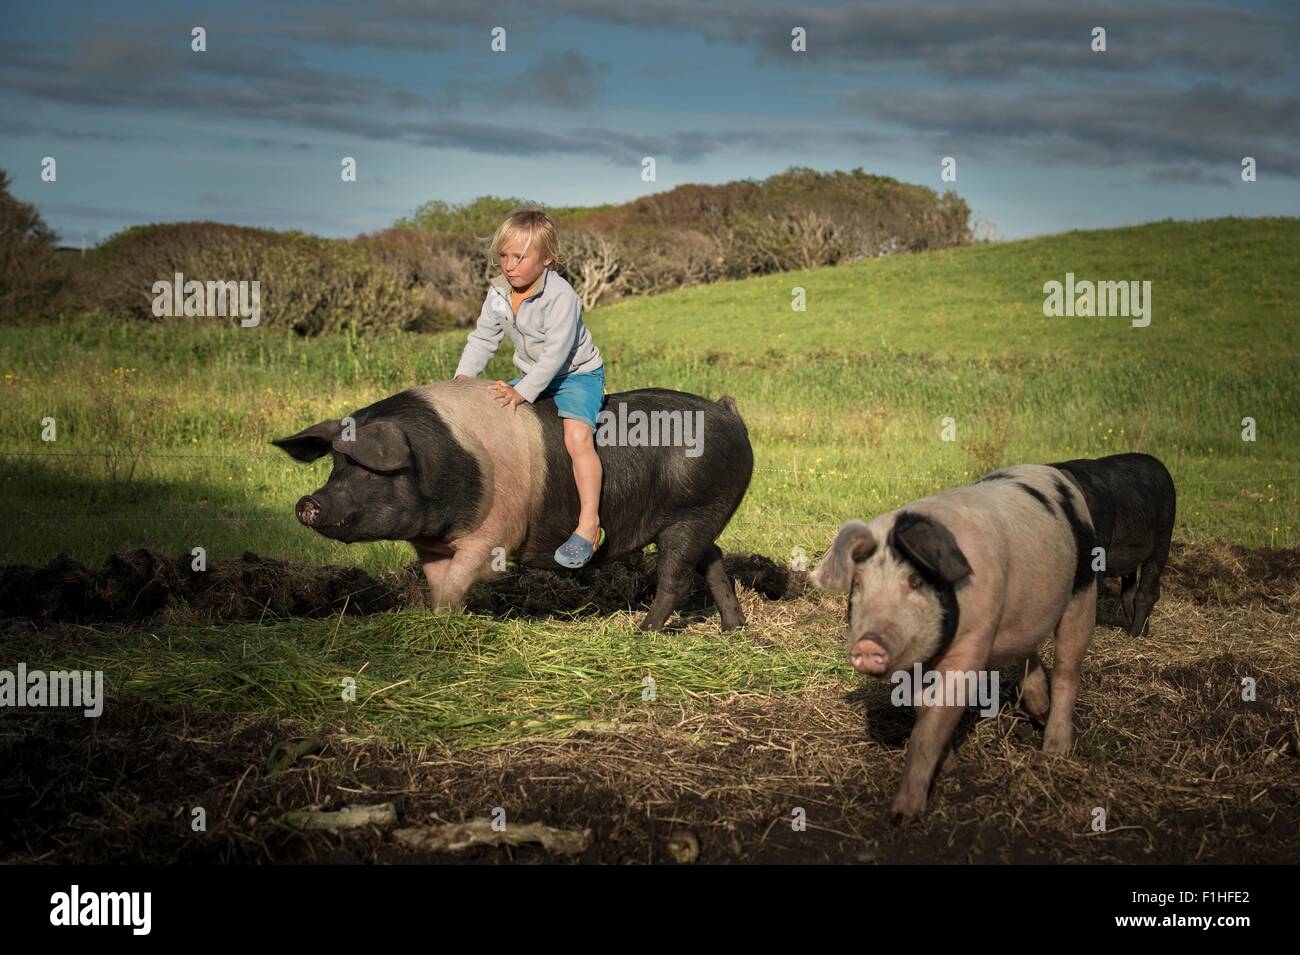 Young boy riding grand pig on hillside Banque D'Images